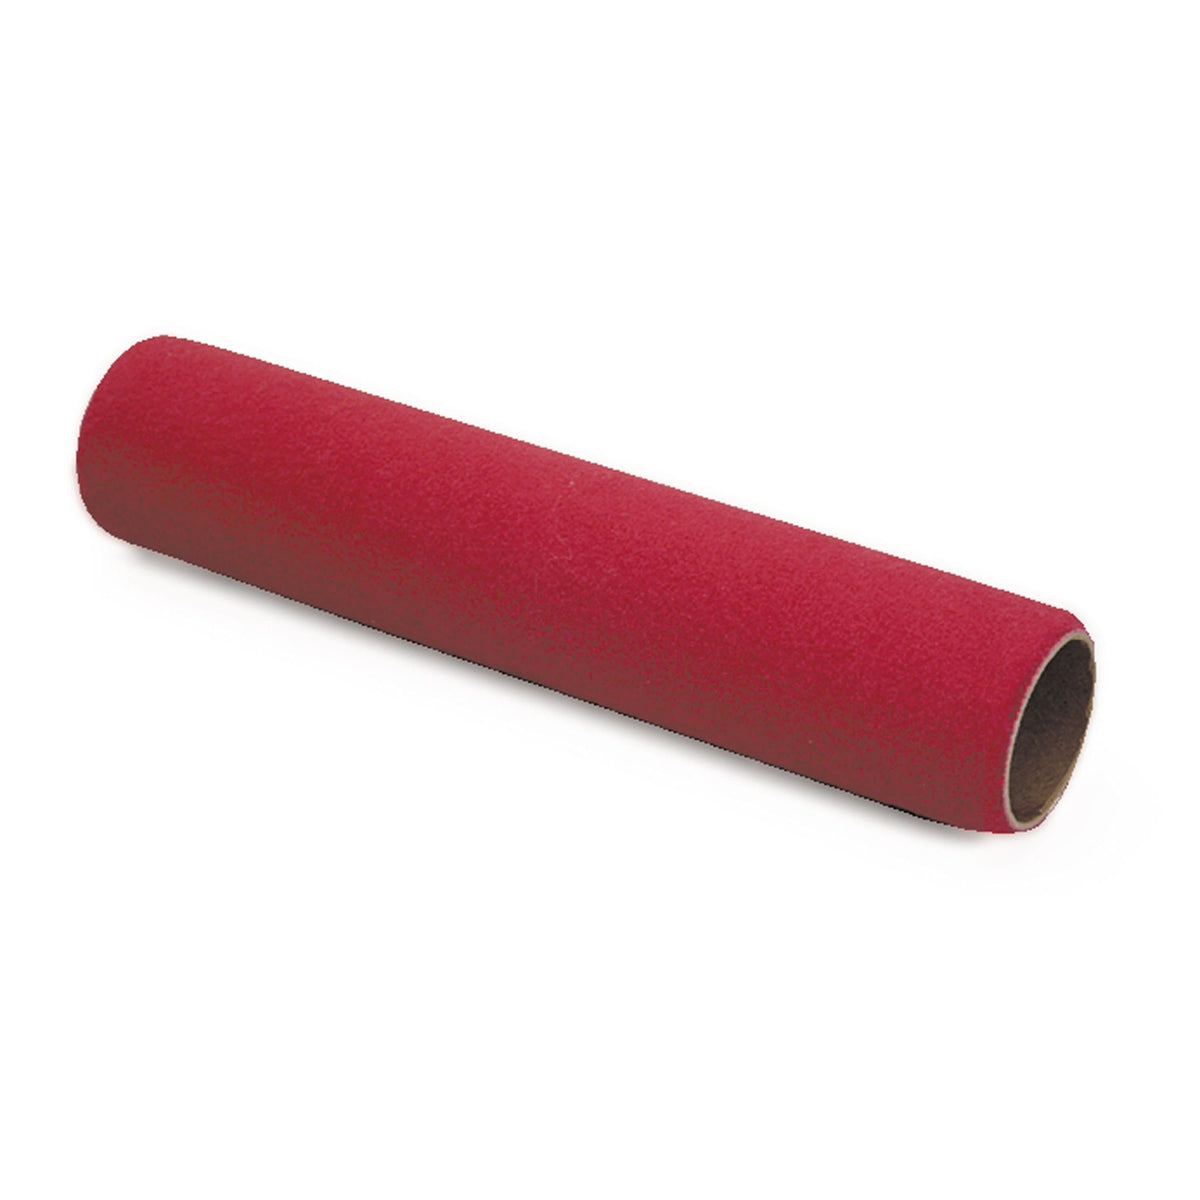 Redtree Deluxe Red Mohair Paint Roller Cover 7" #27113